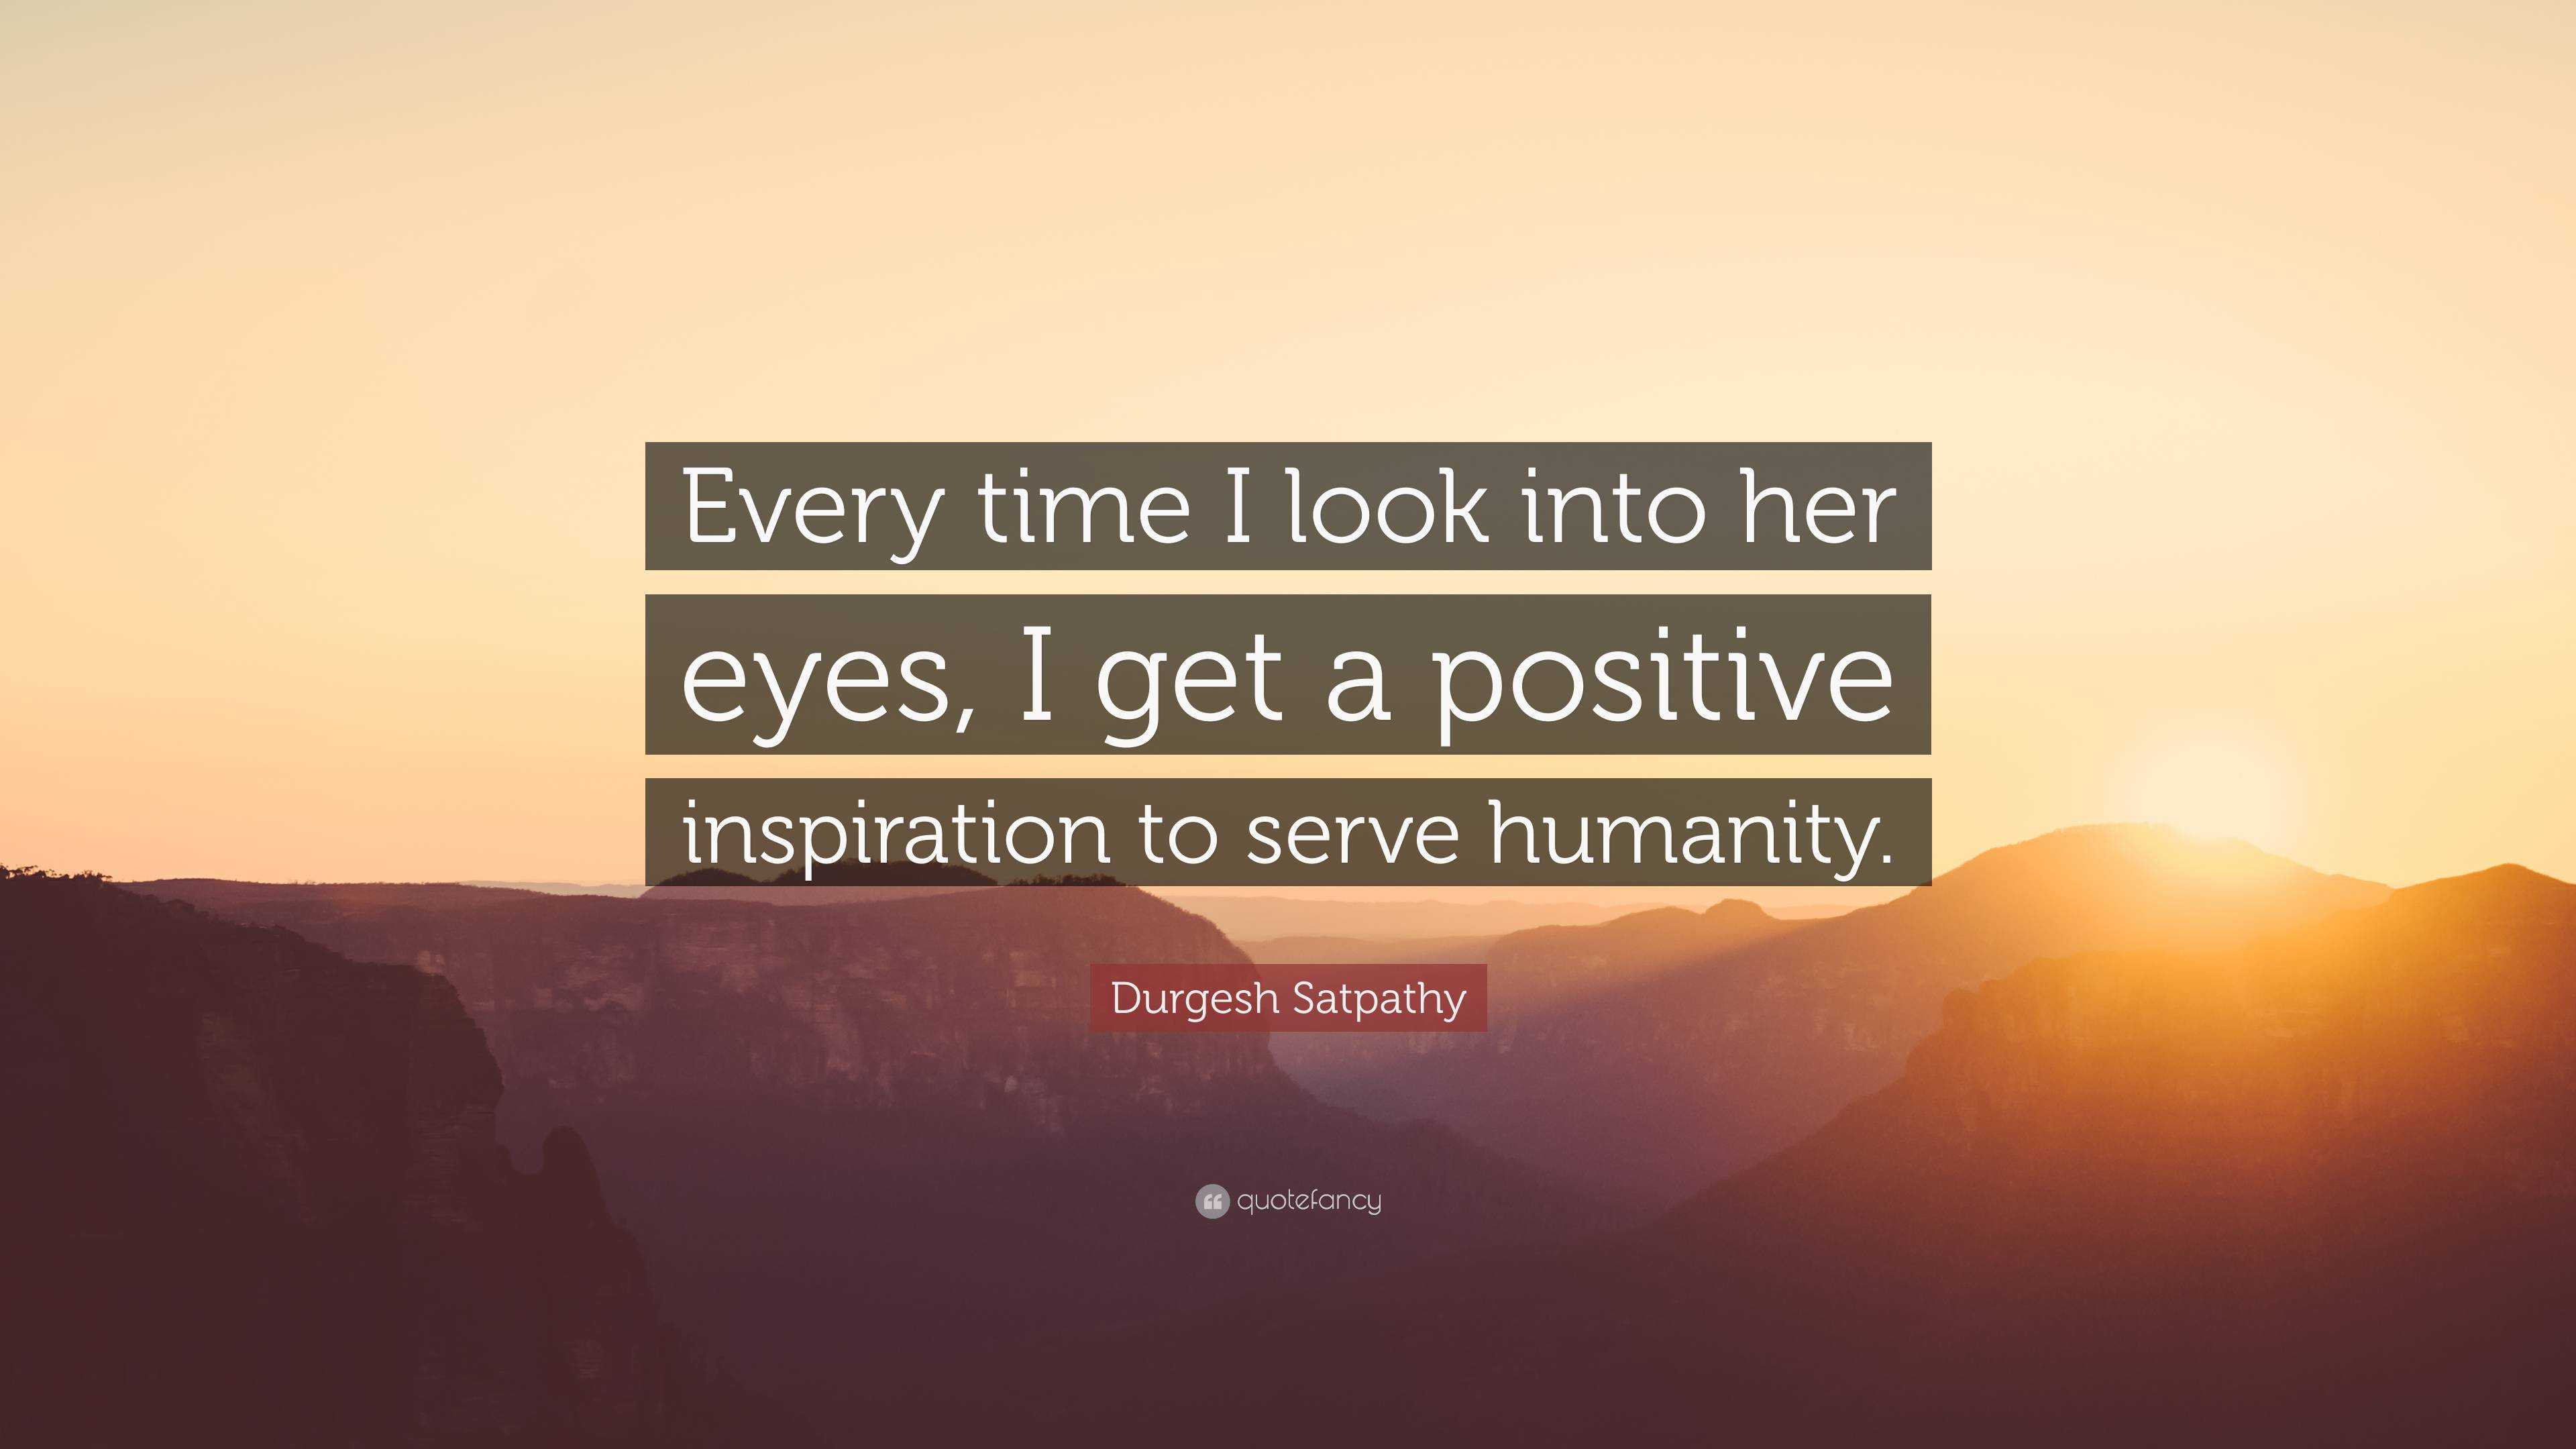 Durgesh Satpathy Quote “every Time I Look Into Her Eyes I Get A Positive Inspiration To Serve